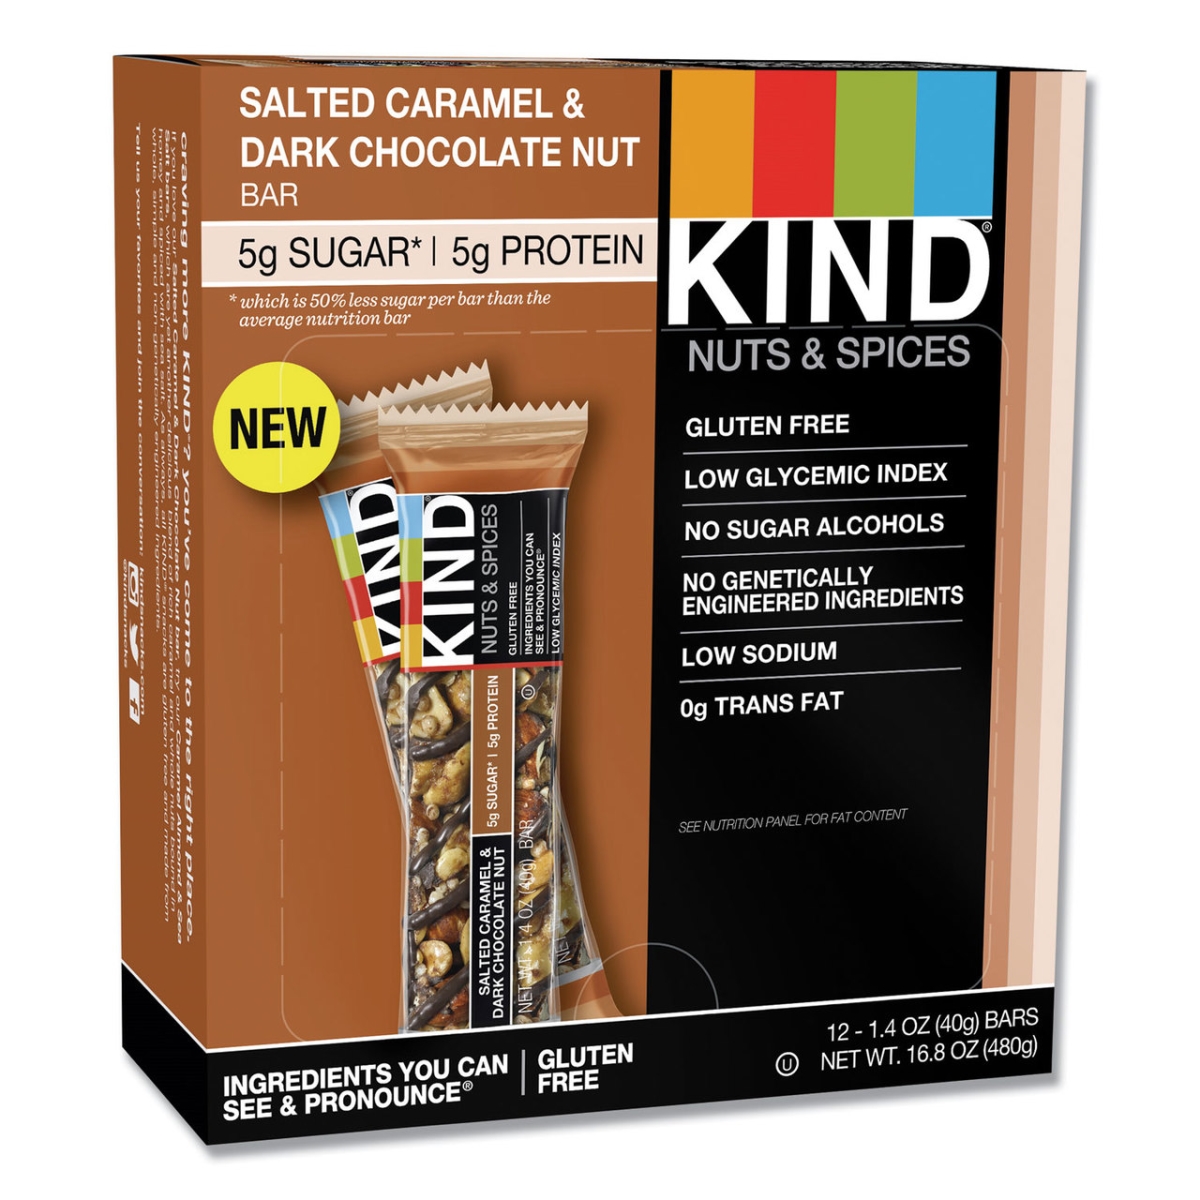 Knd27742 1.4 Oz Food Nuts & Spices Bar Peanut Butter - Pack Of 12